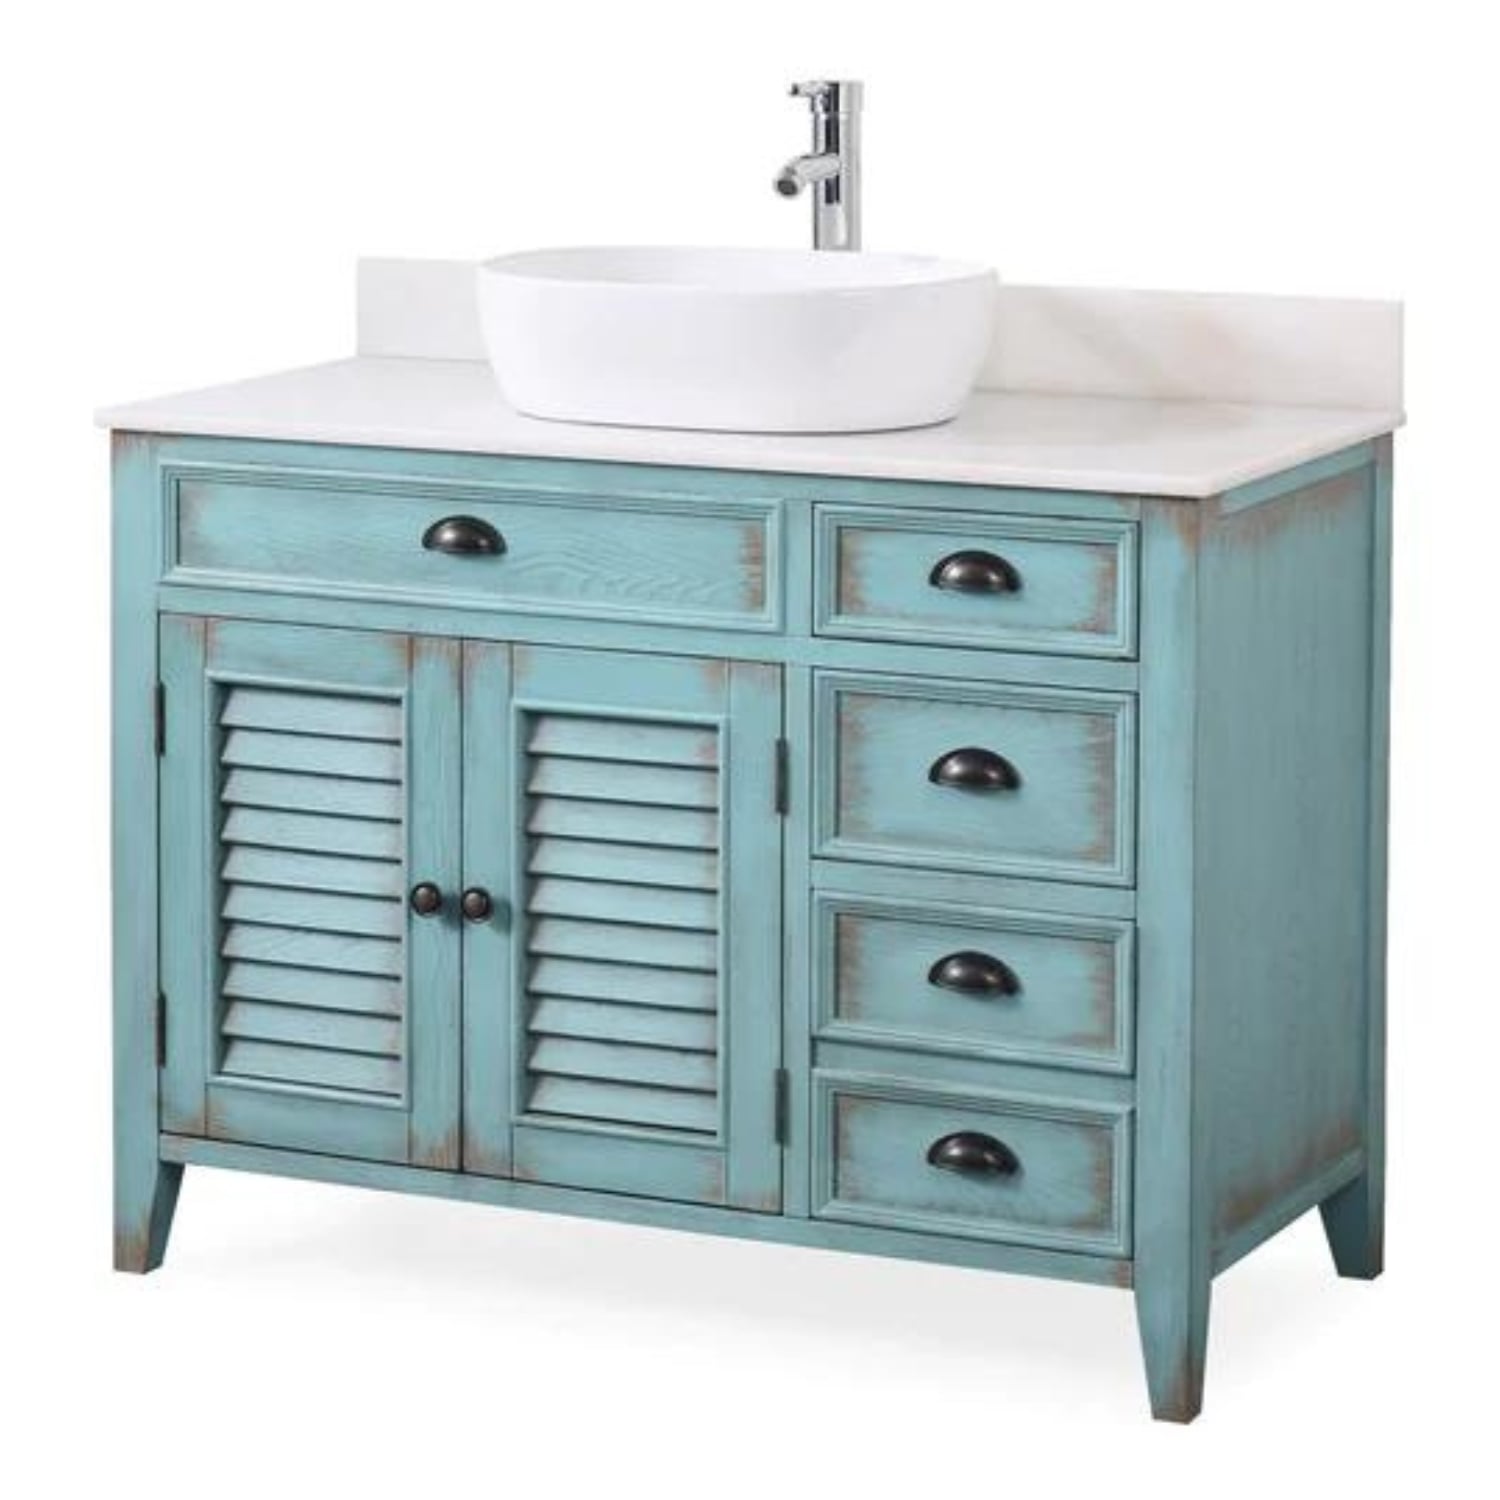 Abbeville 42" Distressed Light Blue Vanity with Sink - Traditional Bathroom Vanity